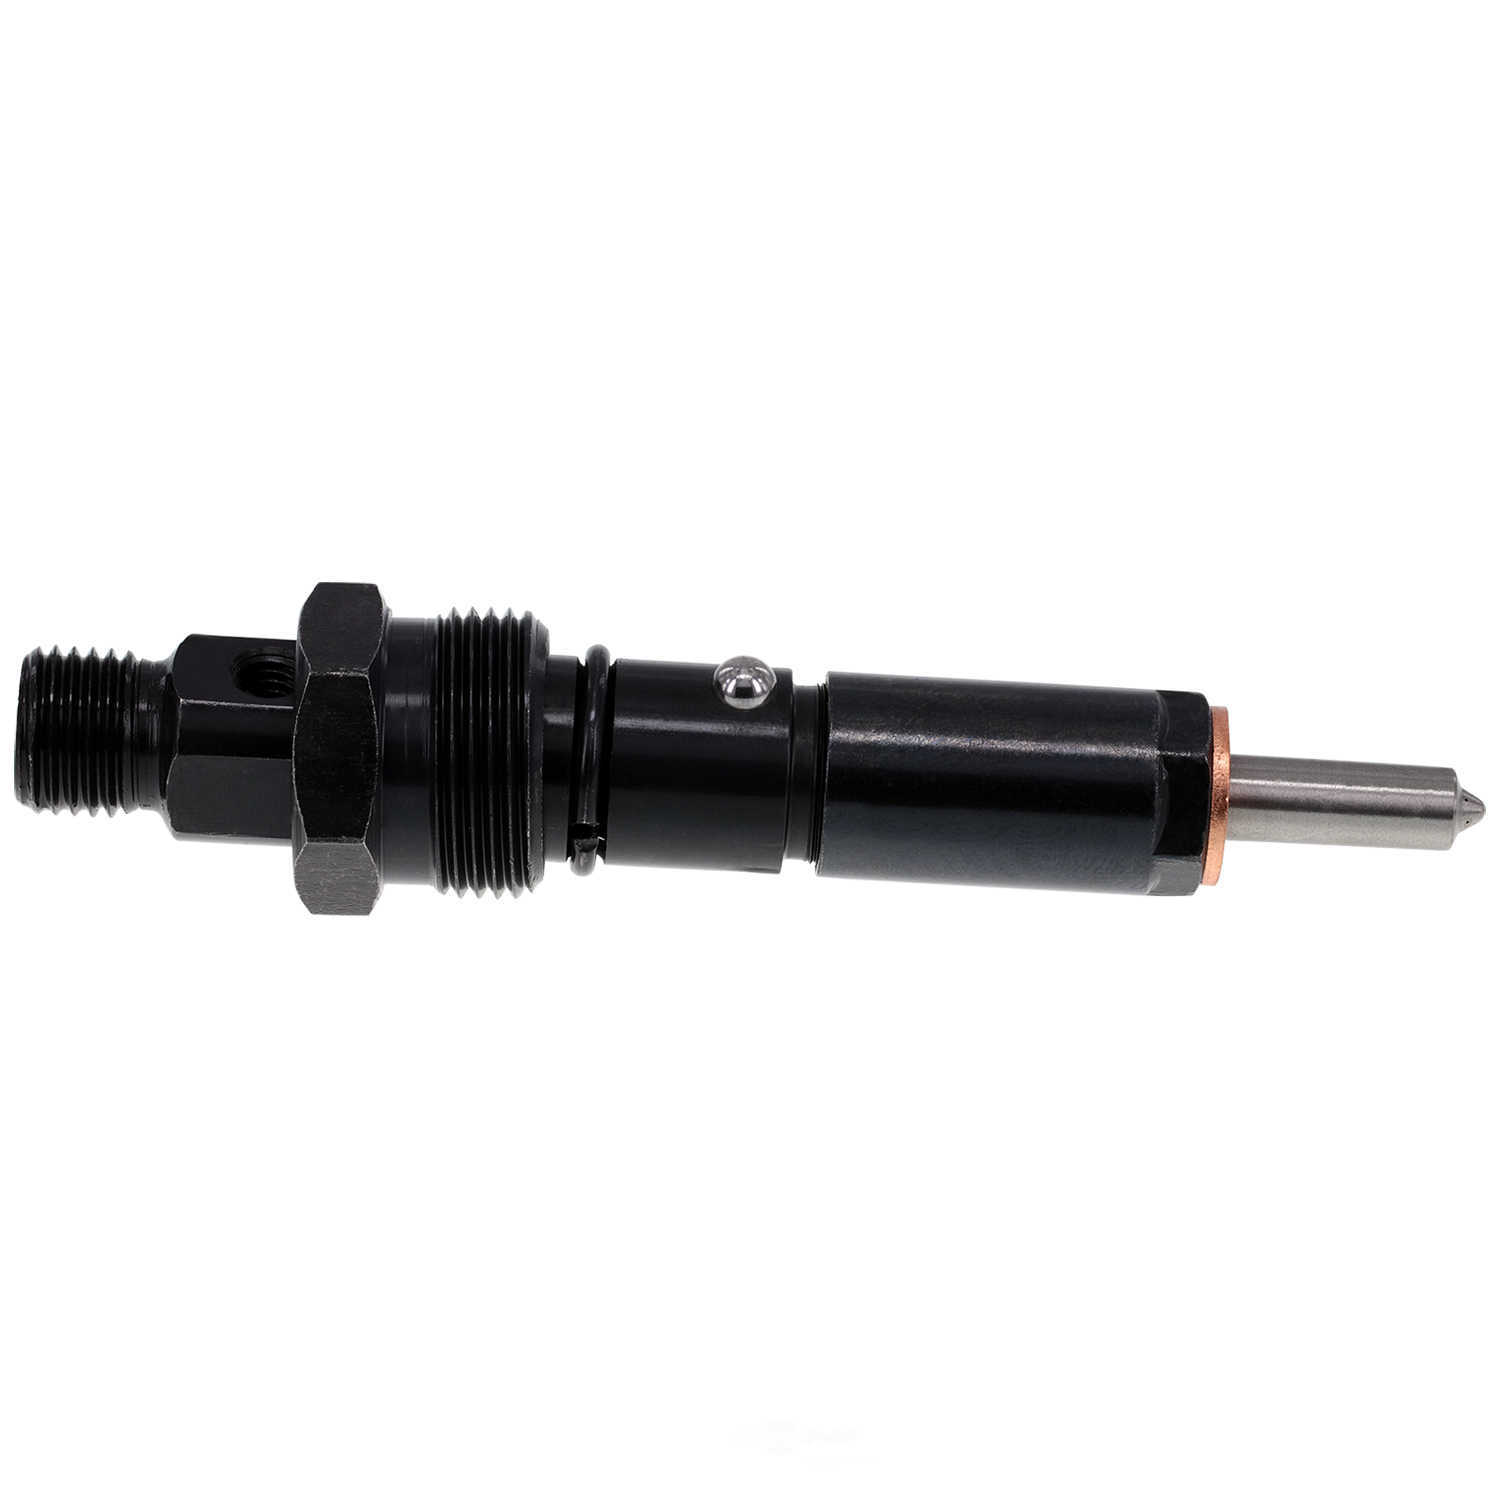 GB REMANUFACTURING INC. - New Diesel Fuel Injector - GBR 611-102